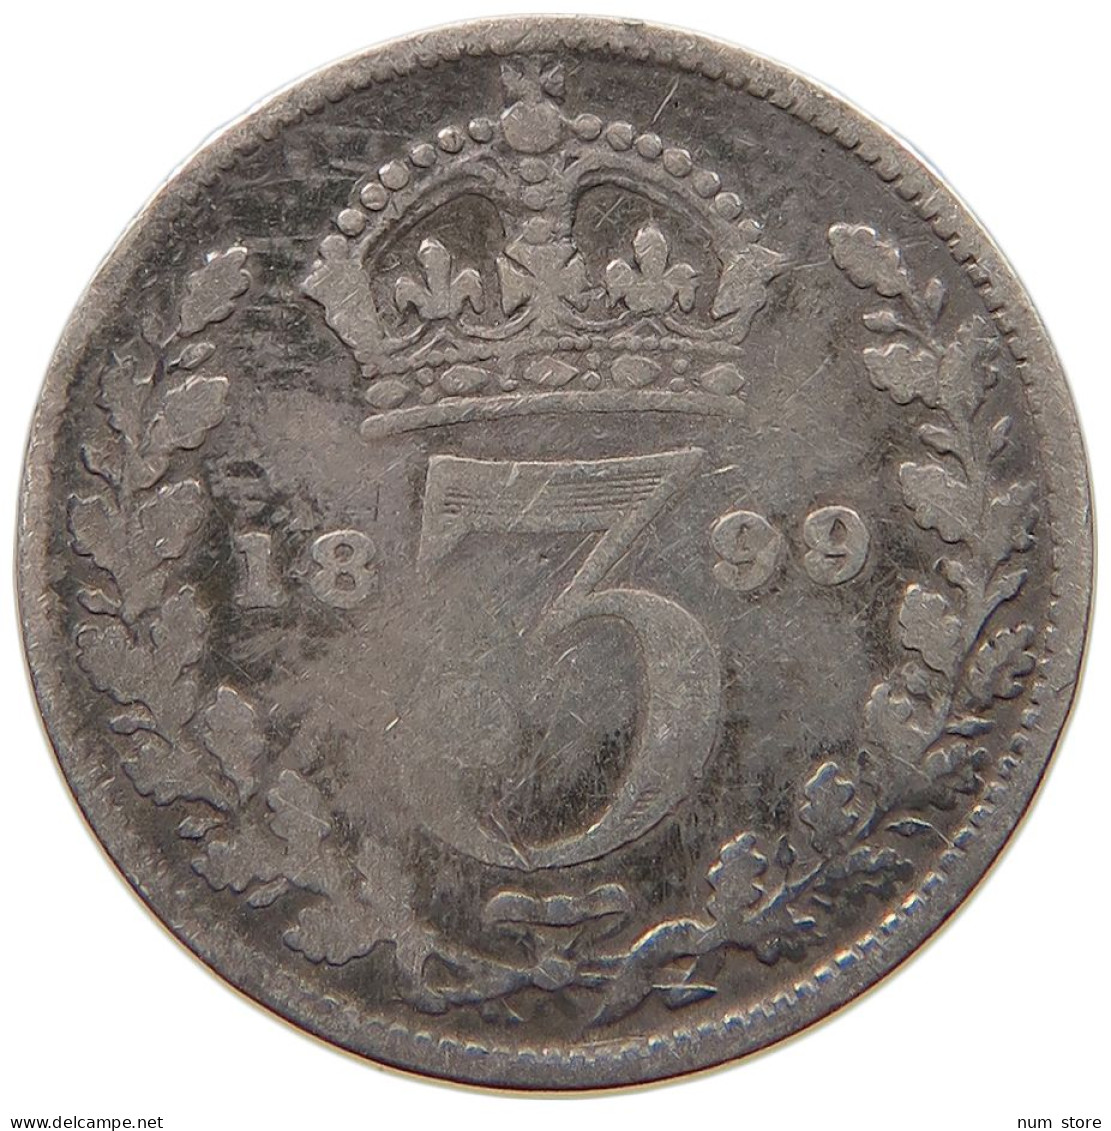 GREAT BRITAIN THREEPENCE 1899 Victoria 1837-1901 #c052 0163 - F. 3 Pence